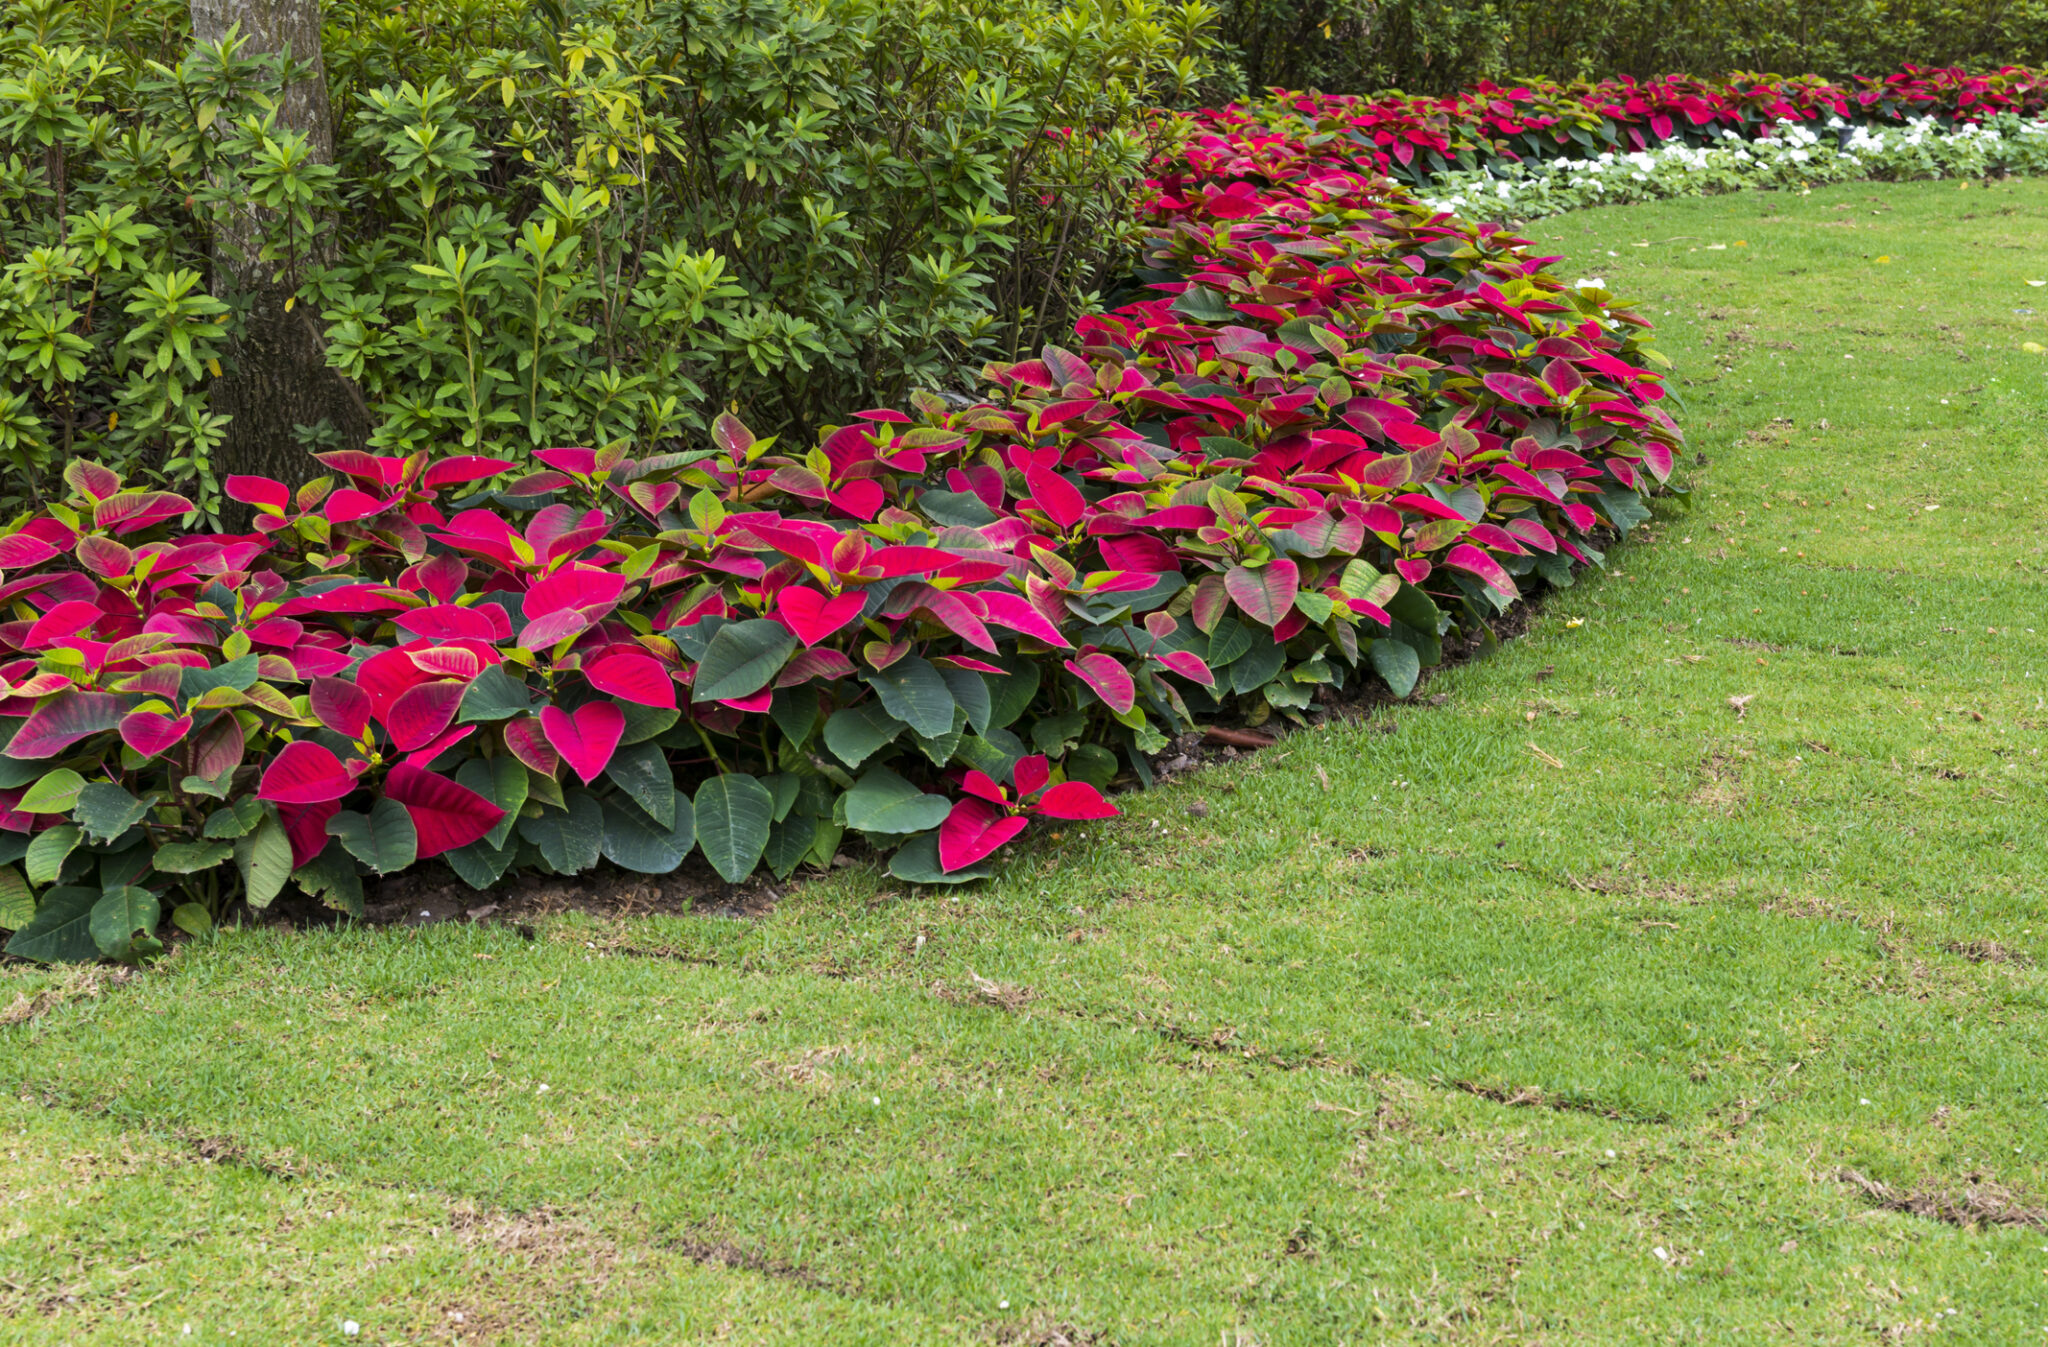 poinsettia-care-growing-guide-jung-seed-s-gardening-blog